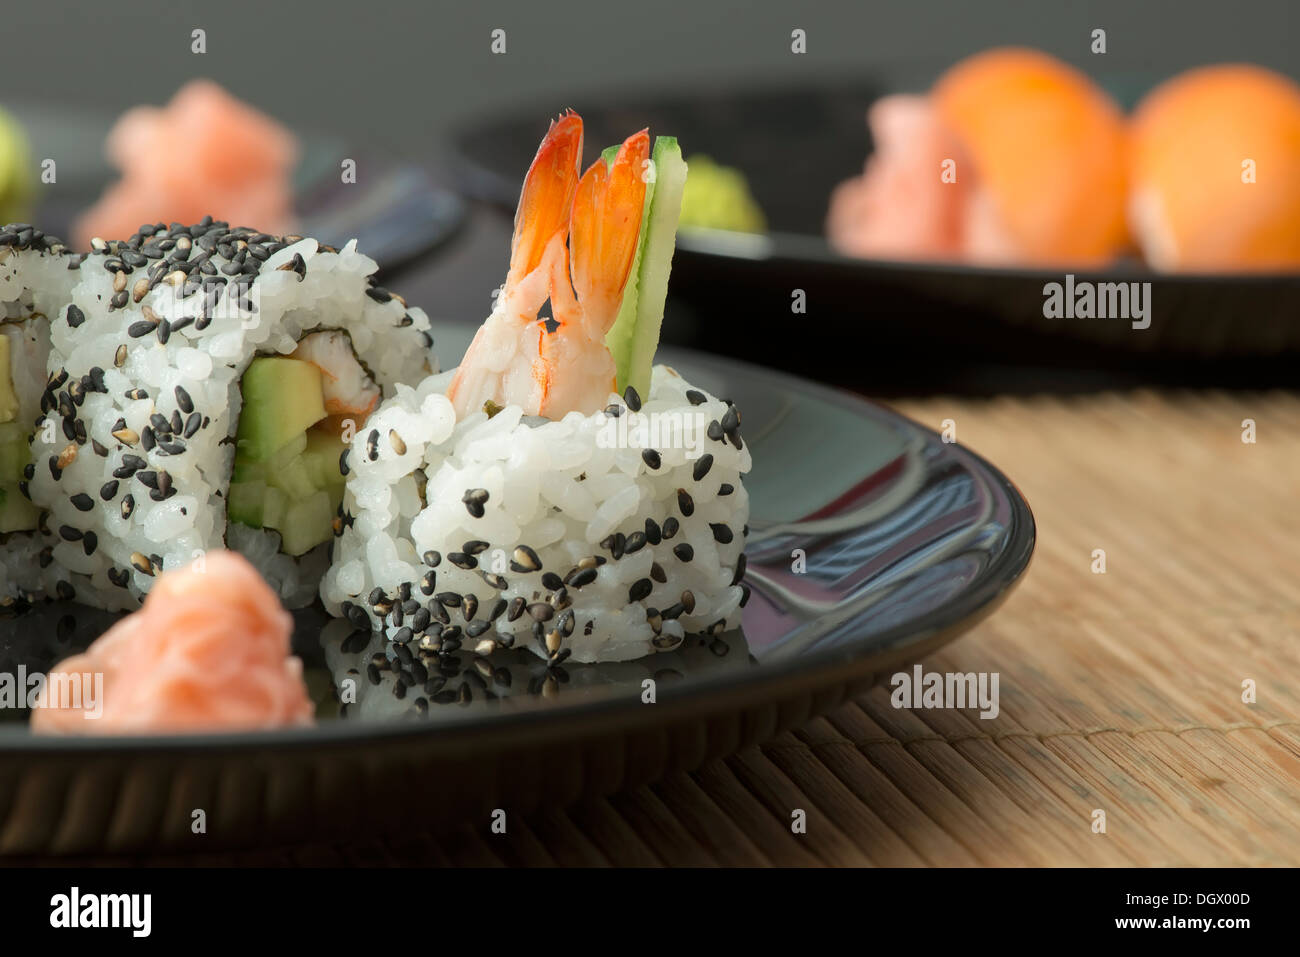 Plate of sushi in restaurant Stock Photo